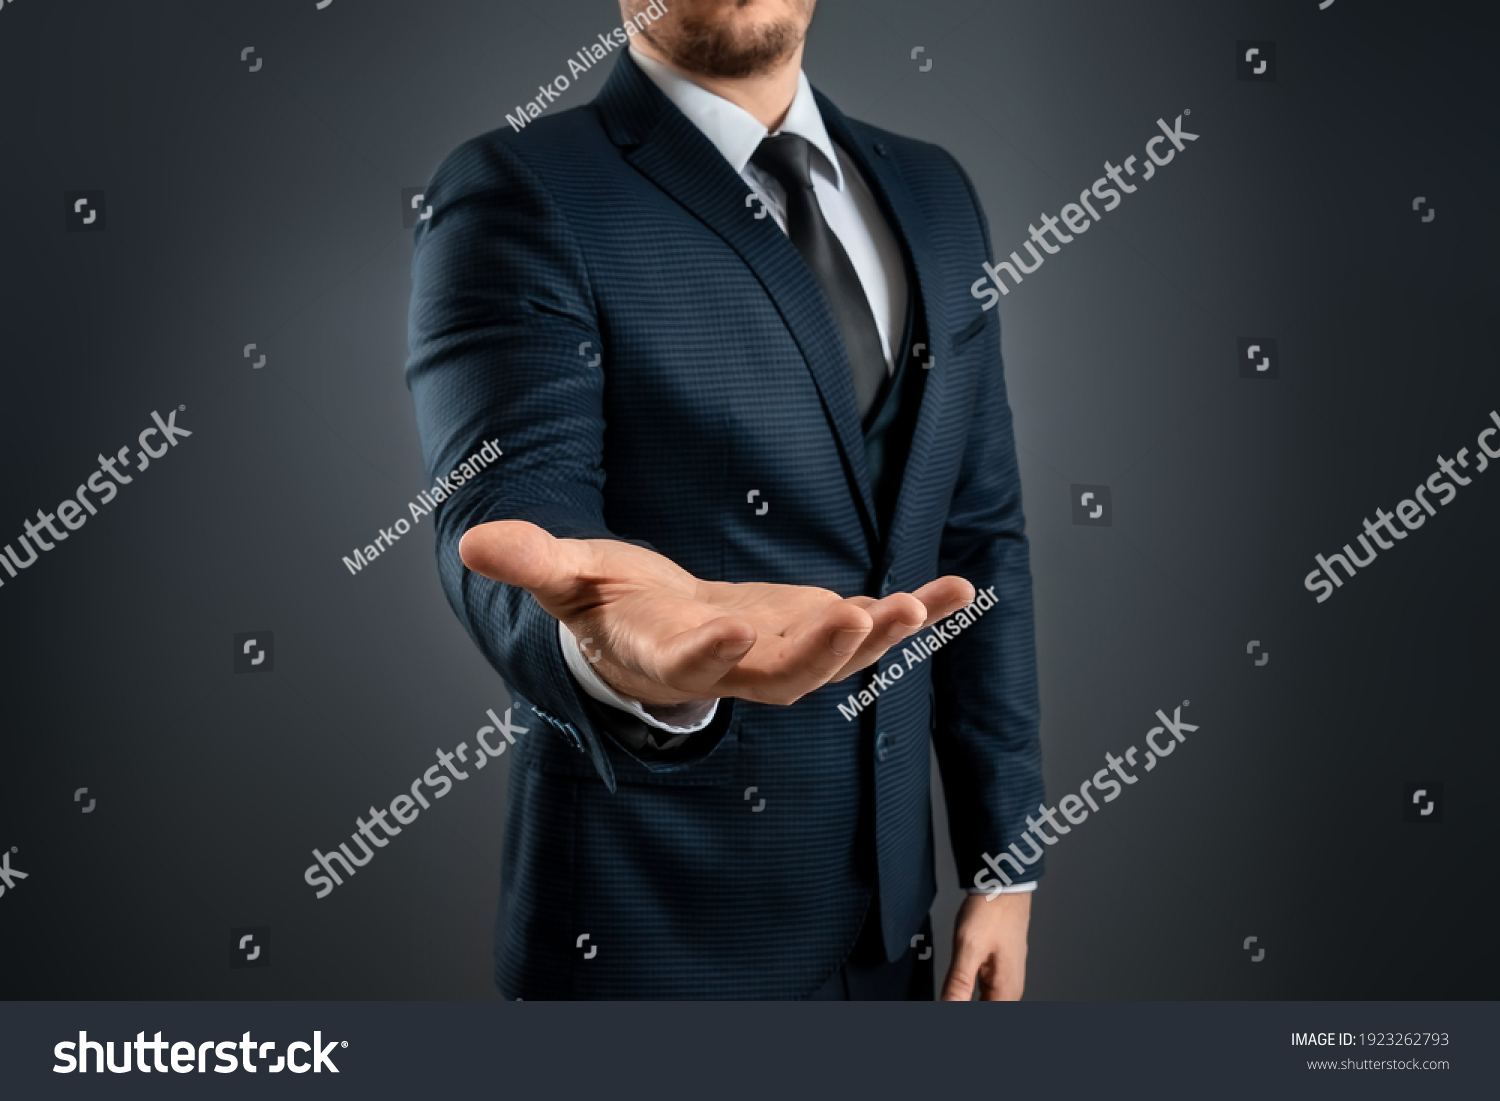 Male hand in a suit shows a palm up gesture on a gray background. Concept of request, bankruptcy, close-up #1923262793